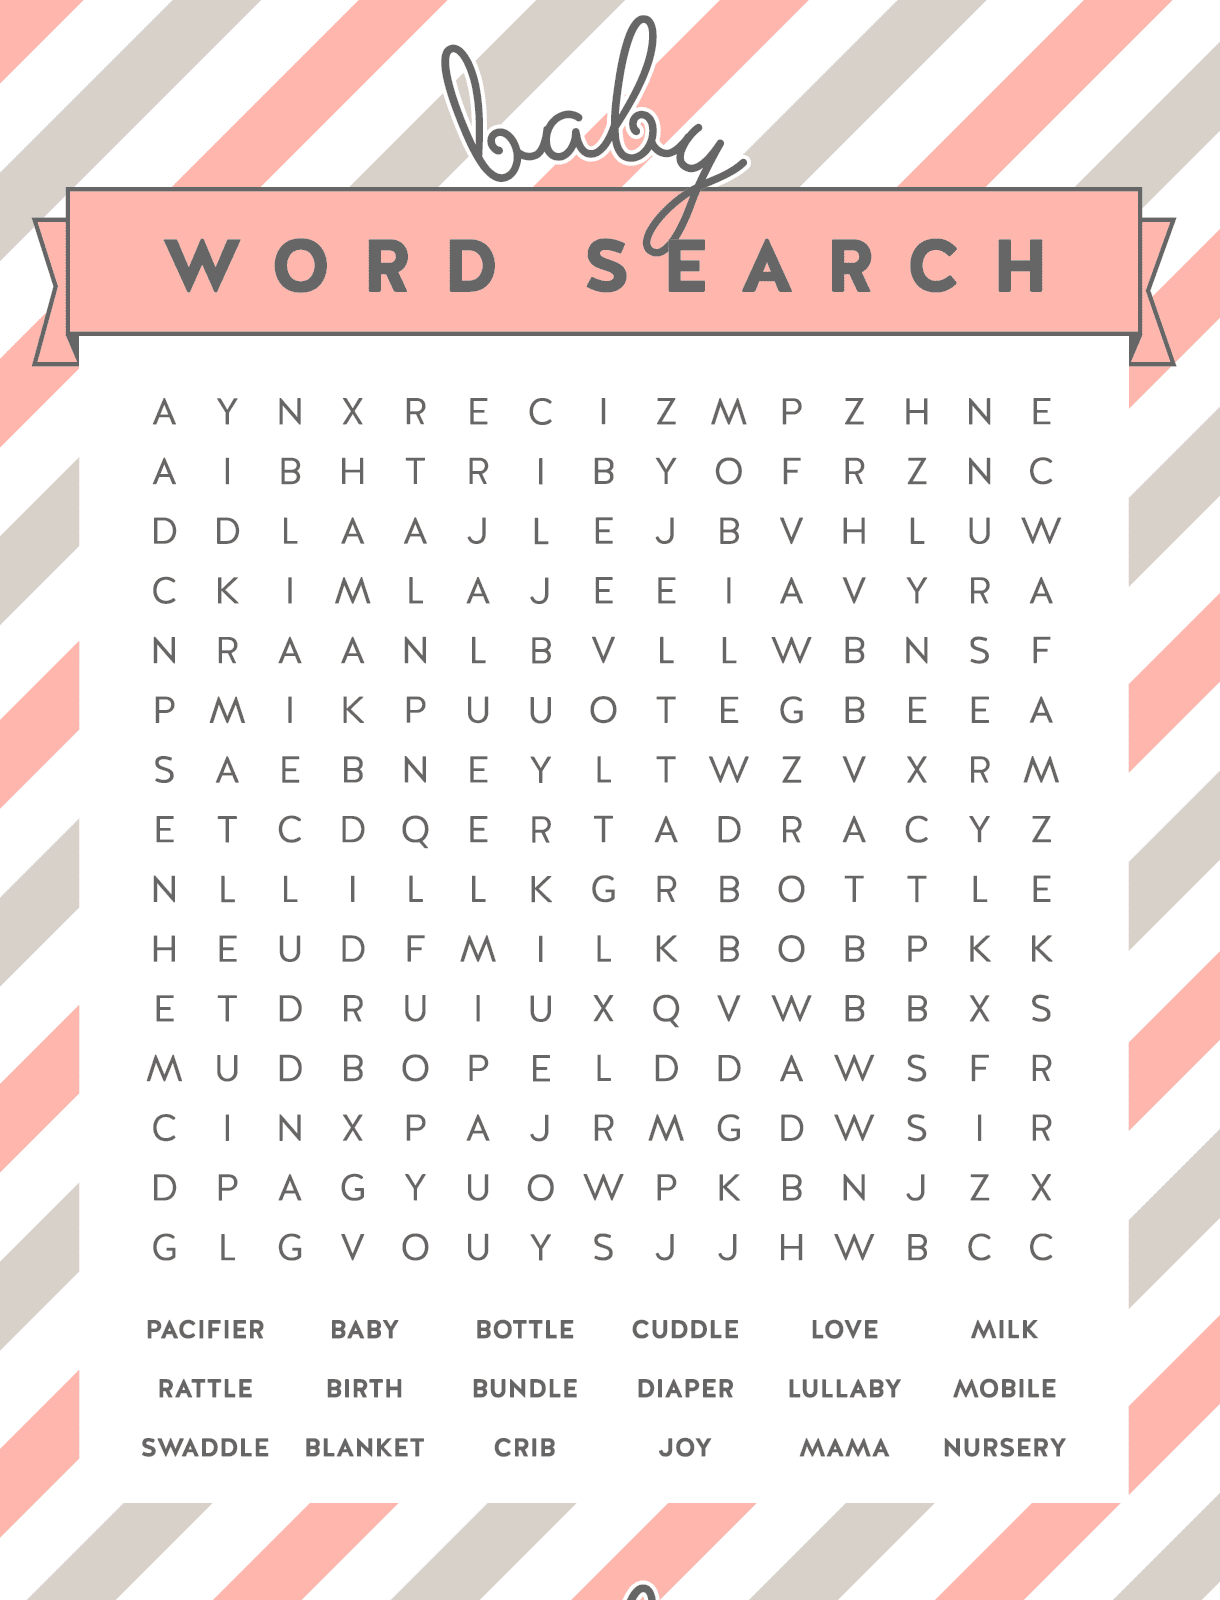 Free Baby Shower Word Search Puzzles - Printable Birthday Puzzles